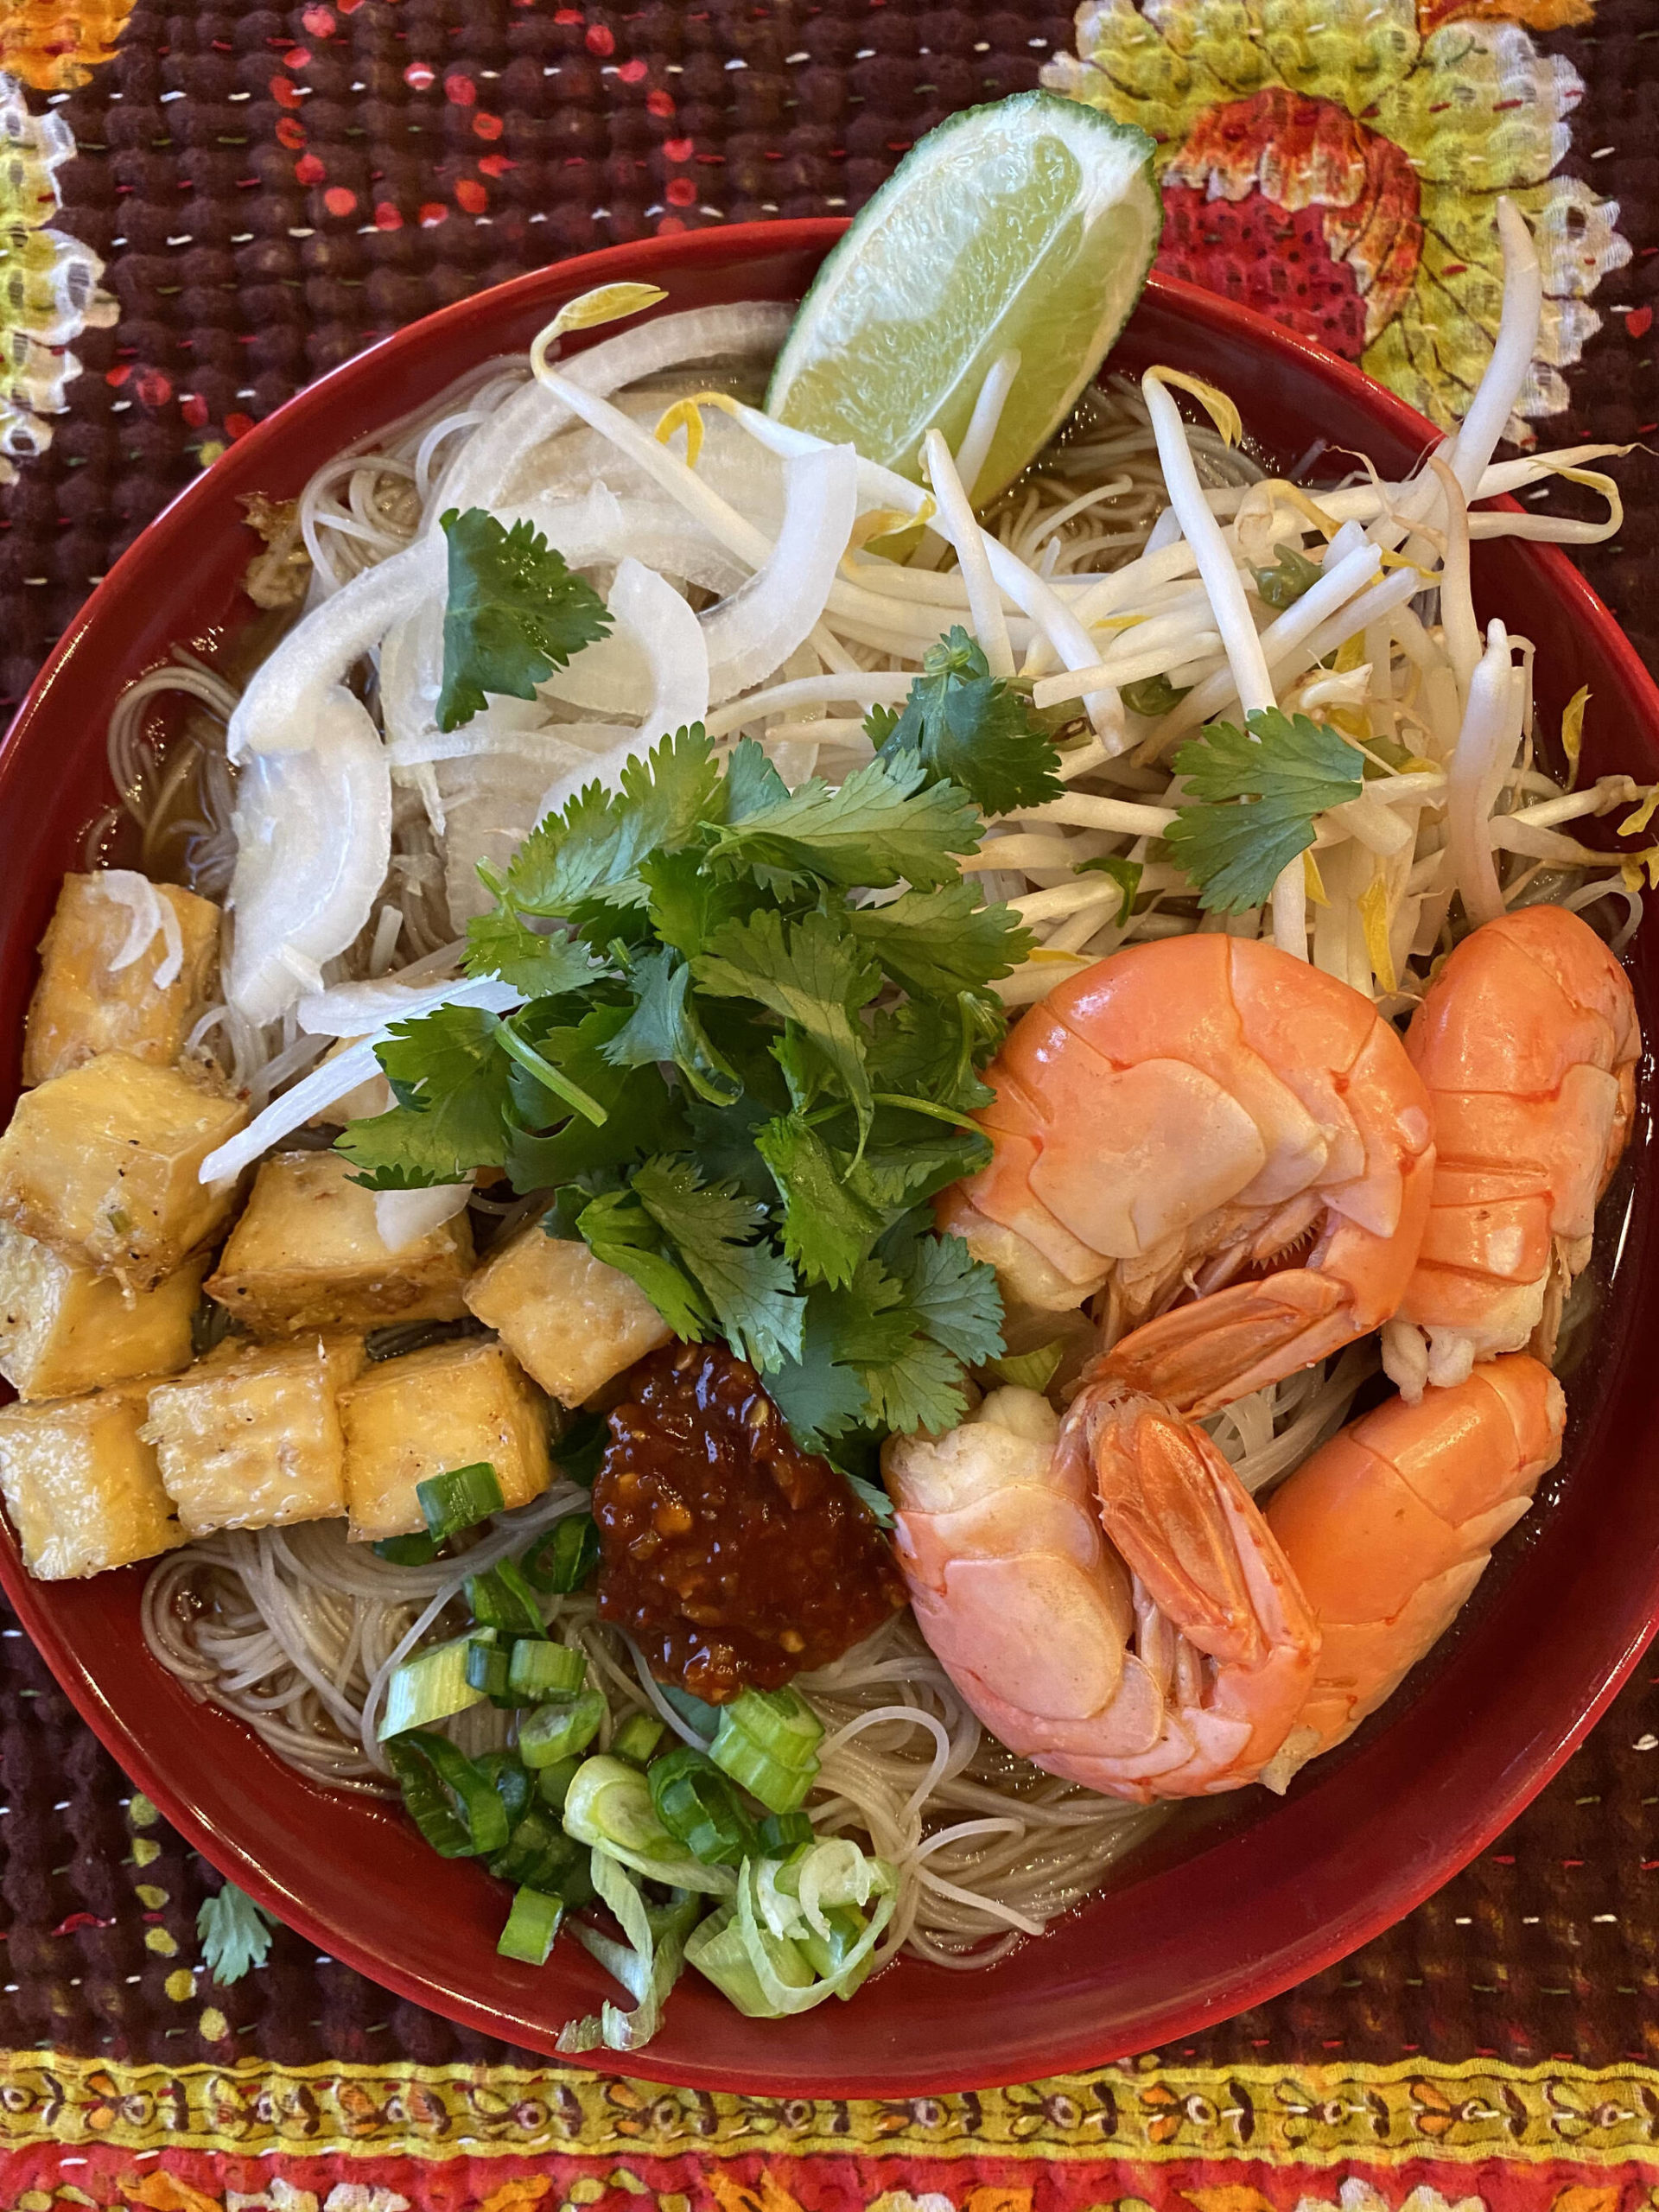 Rice noodles, tofu, lemon grass, cilantro, shrimp and bean sprouts top this homemade pho. (Photo by Tressa Dale/Peninsula Clarion)